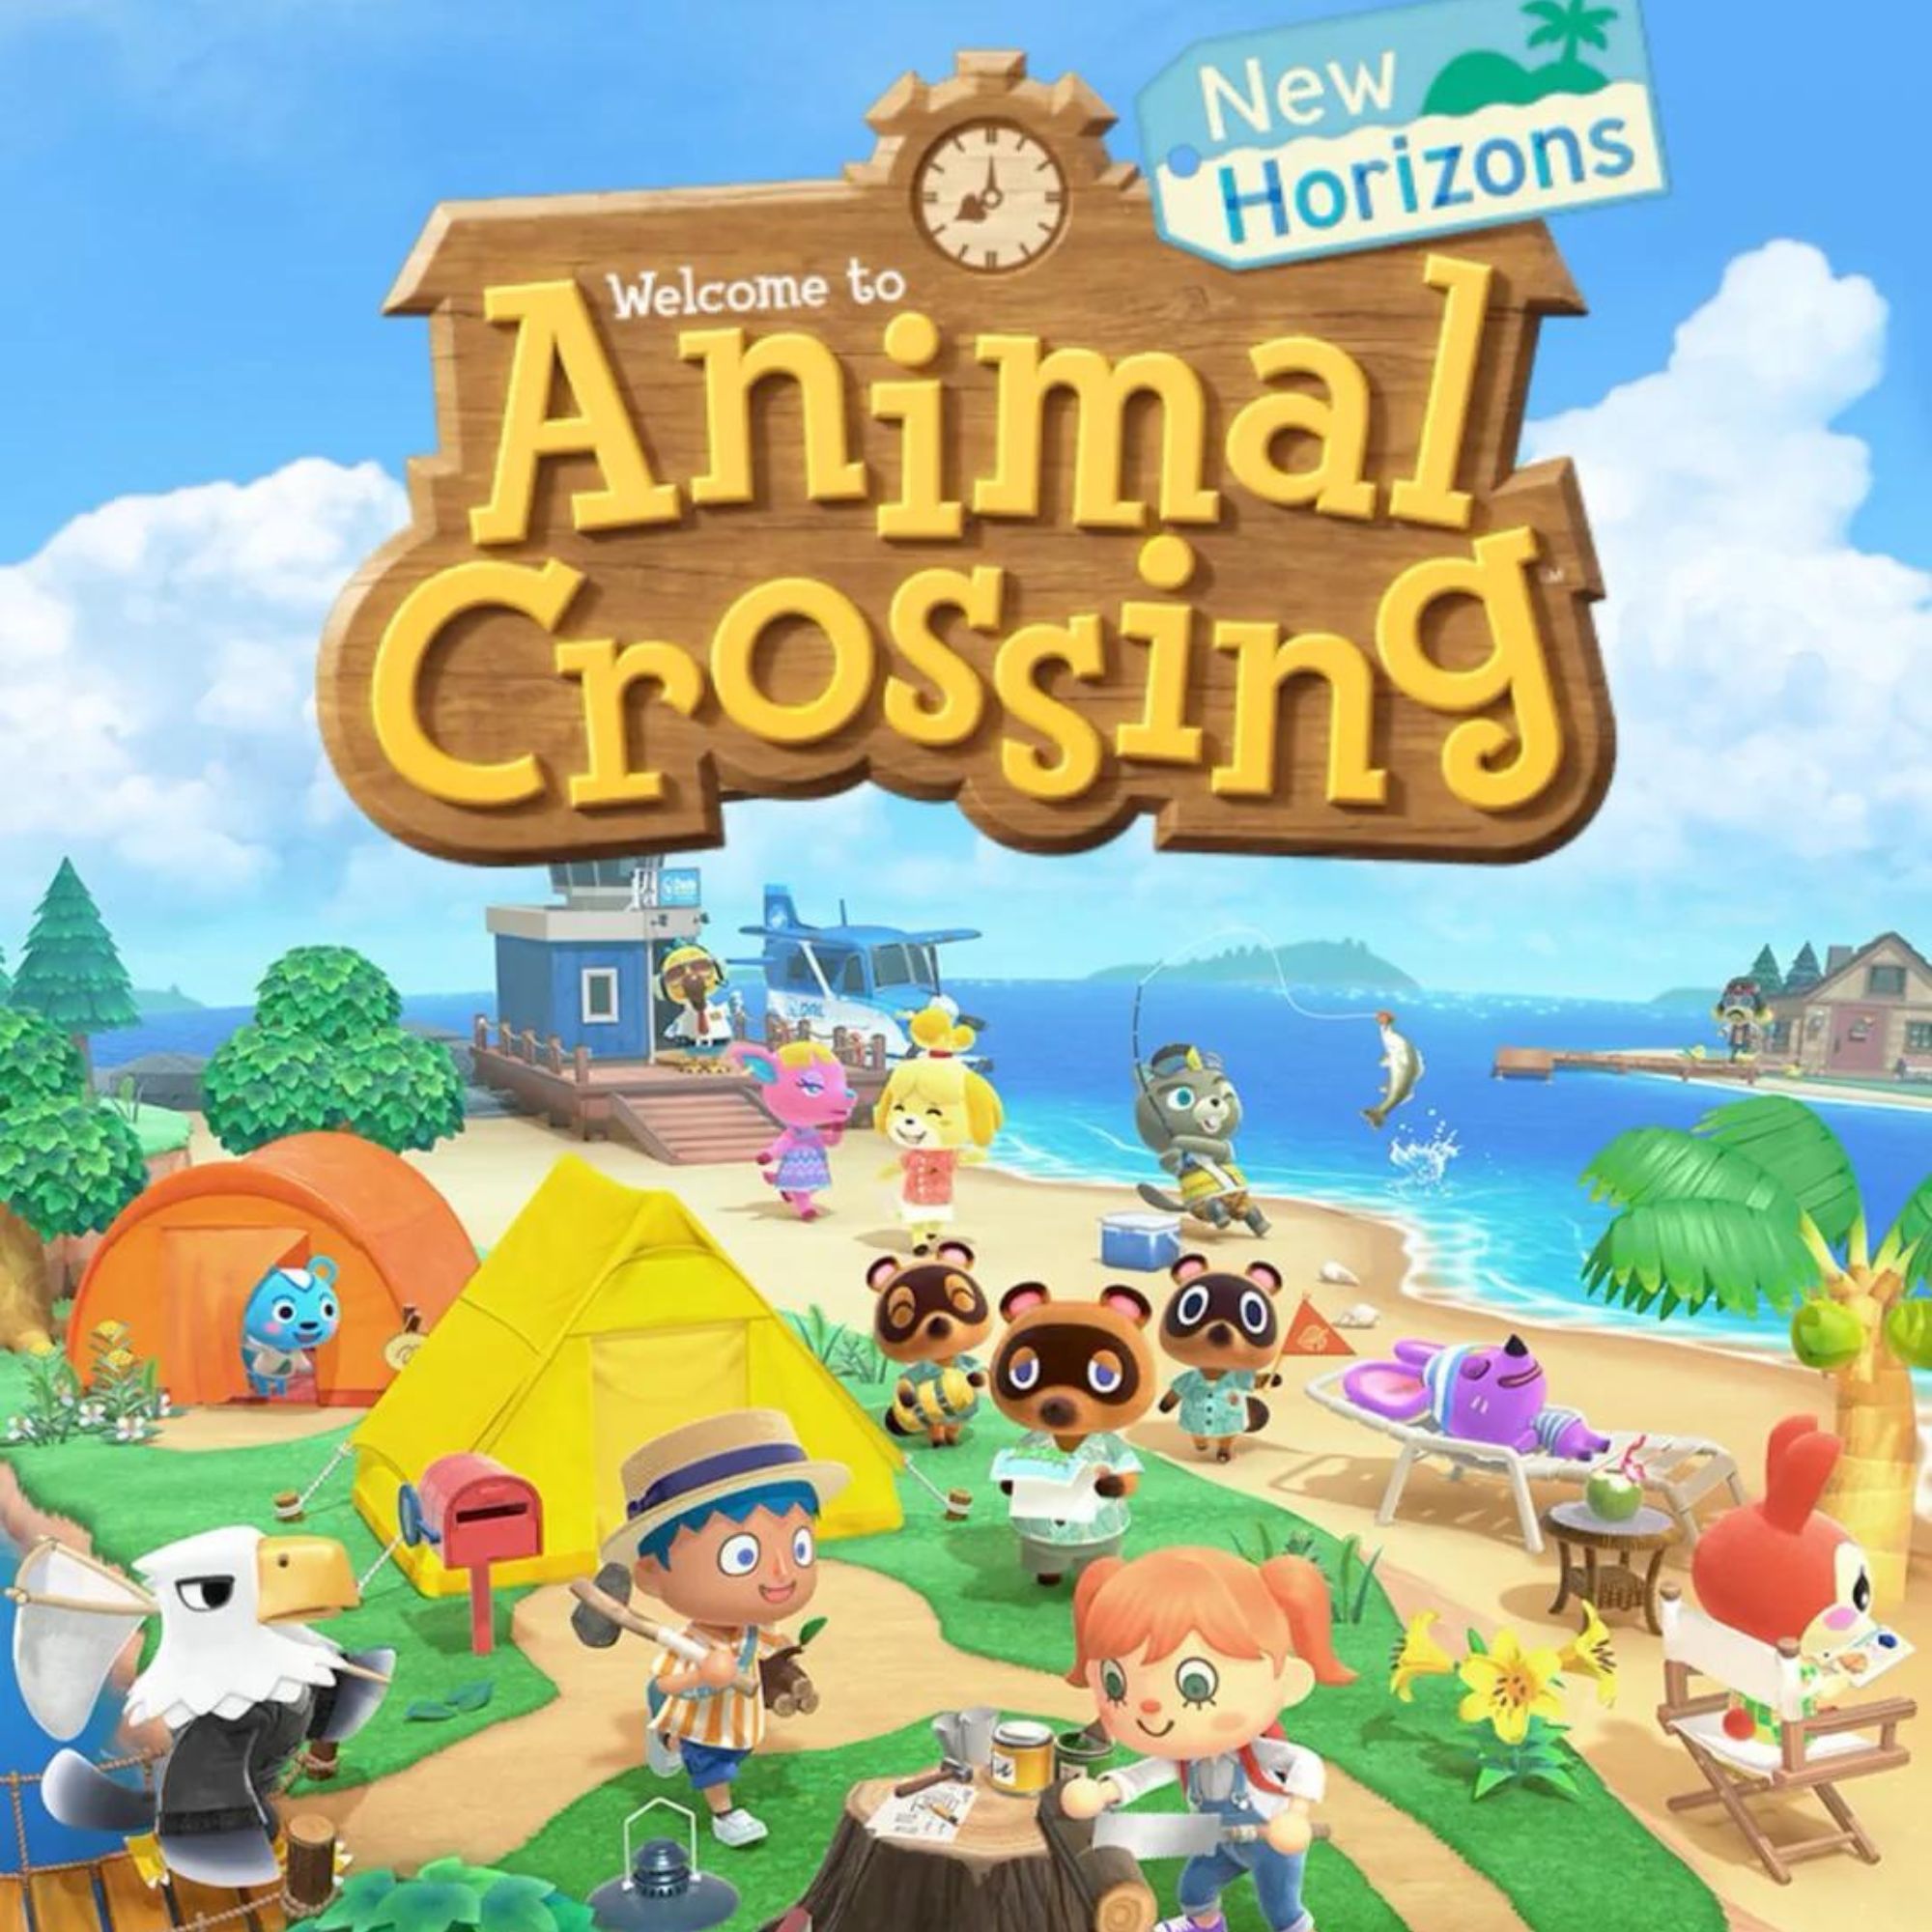 Product tile for Animal Crossing: New Horizons featuring Tom, Isabelle and the islanders